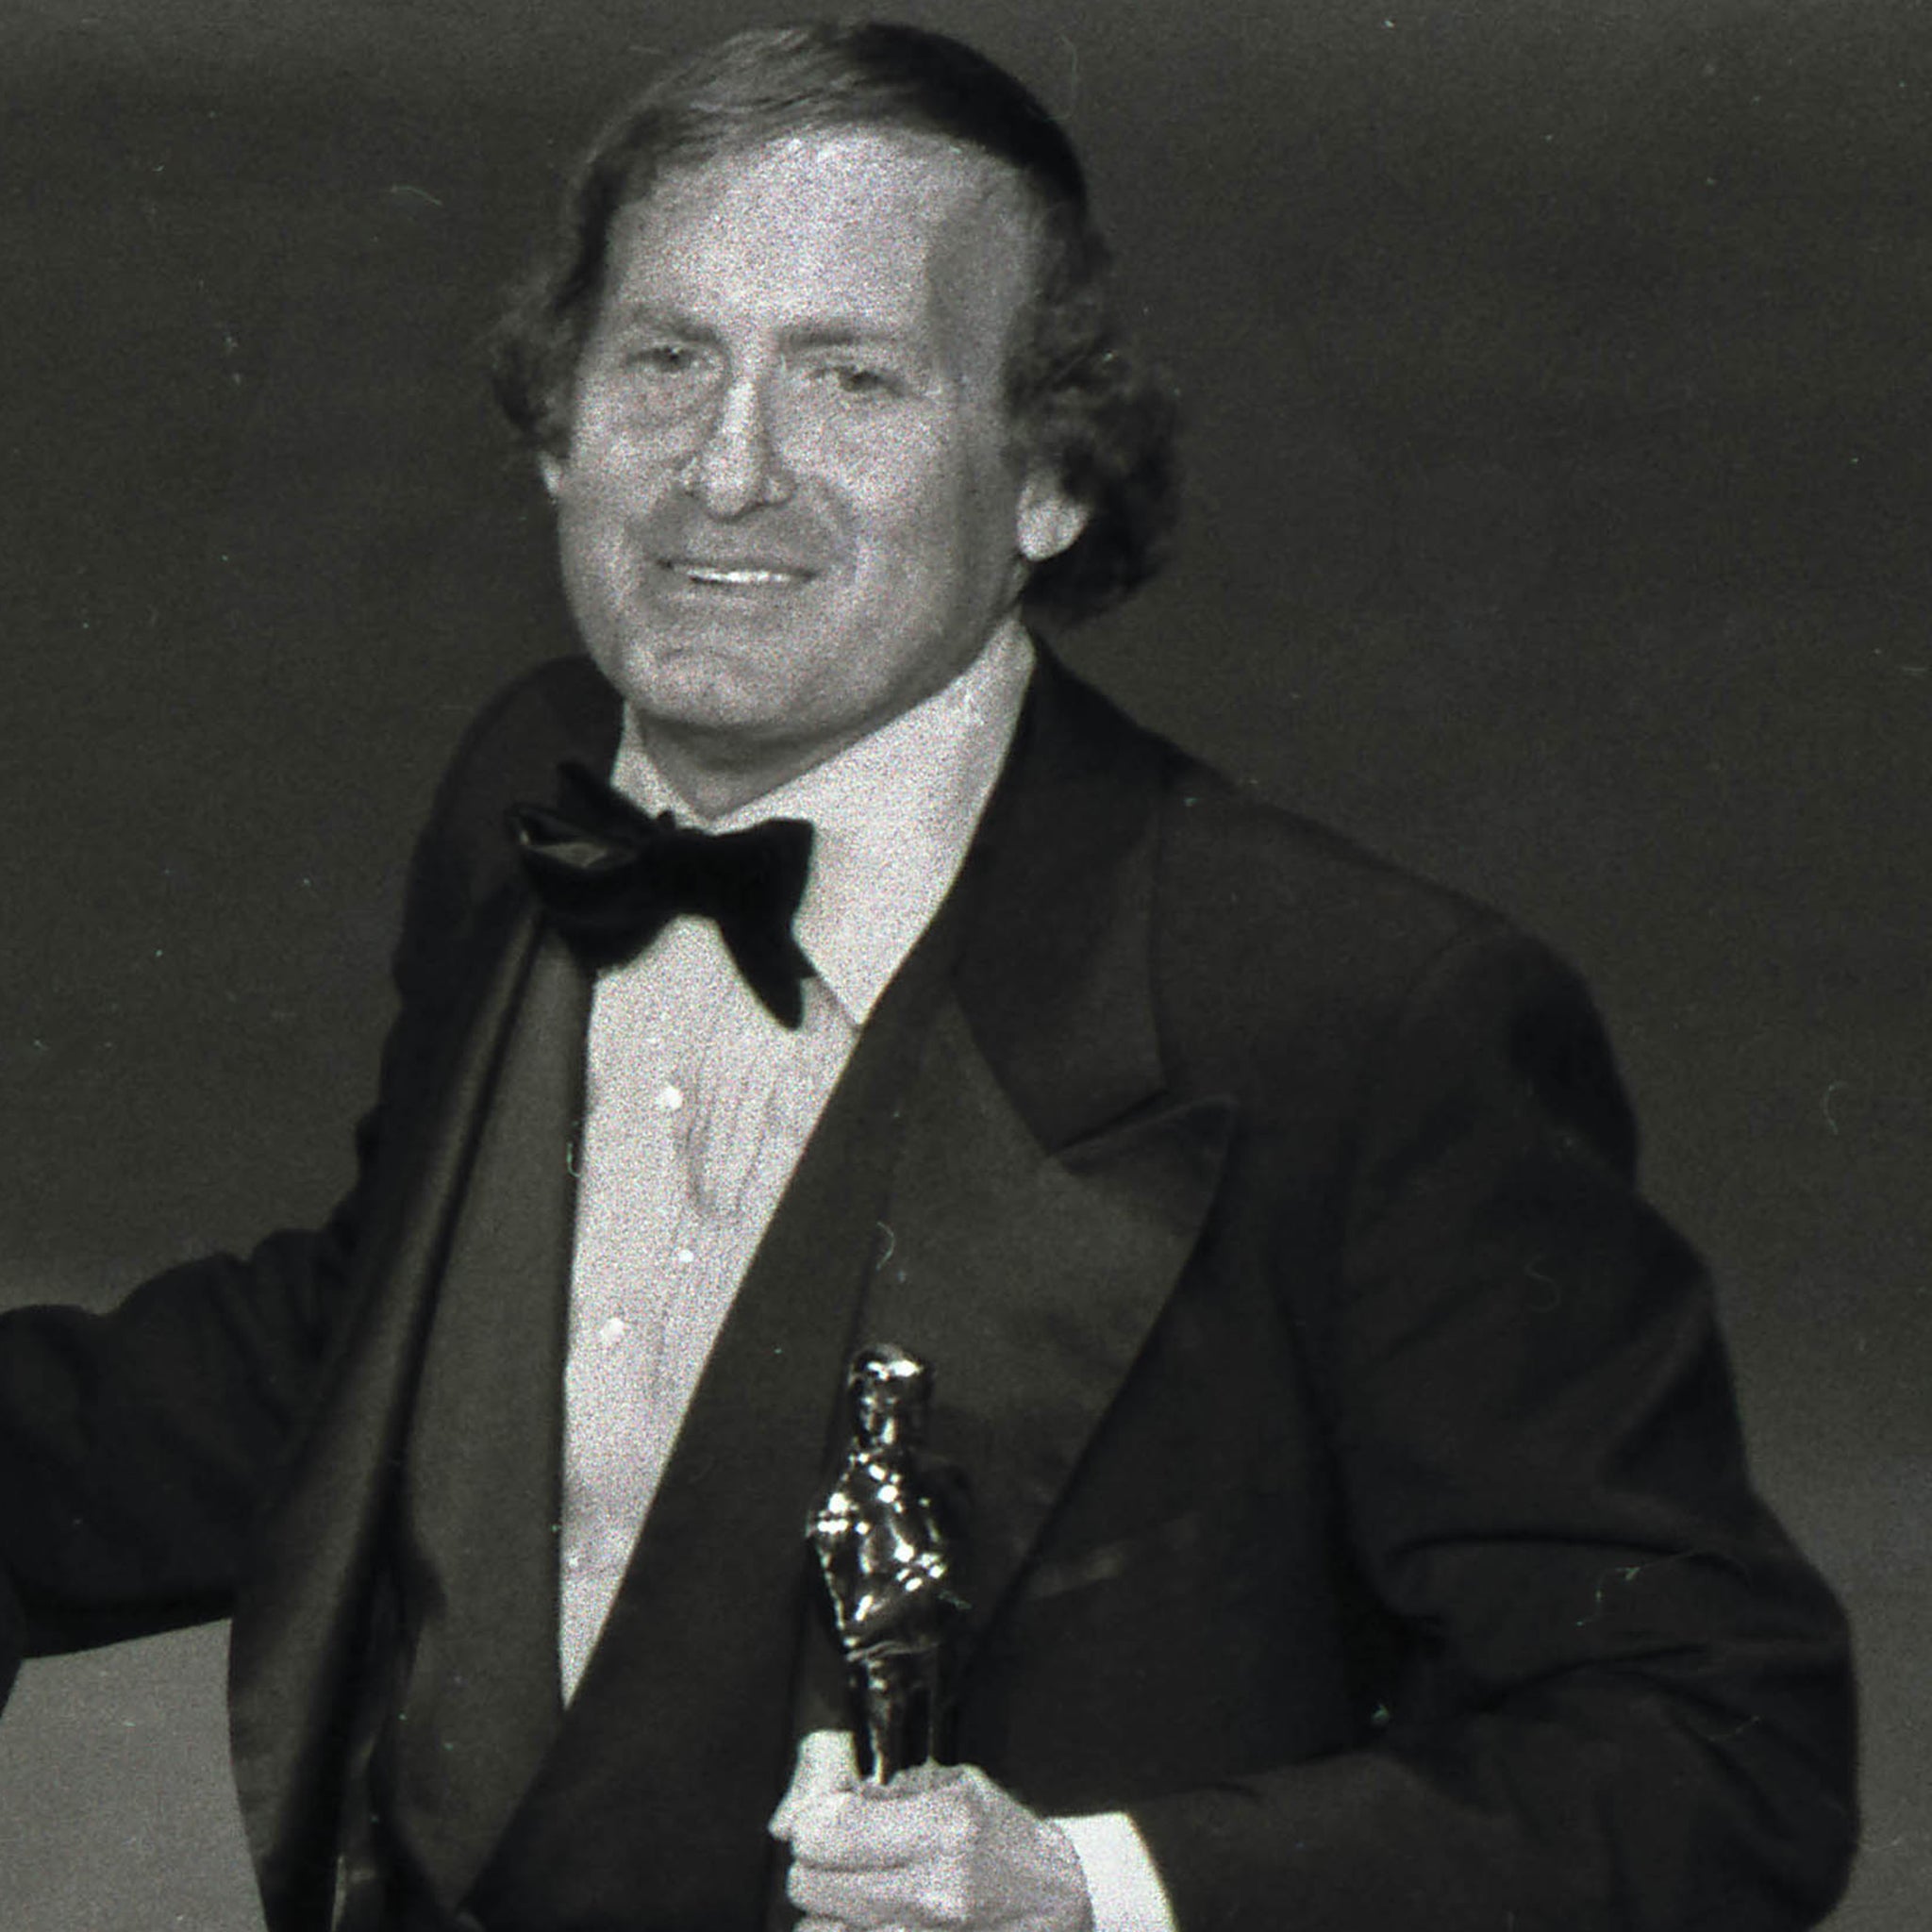 Chartoff in 1977 with the Best Picture Academy Award for ‘Rocky’